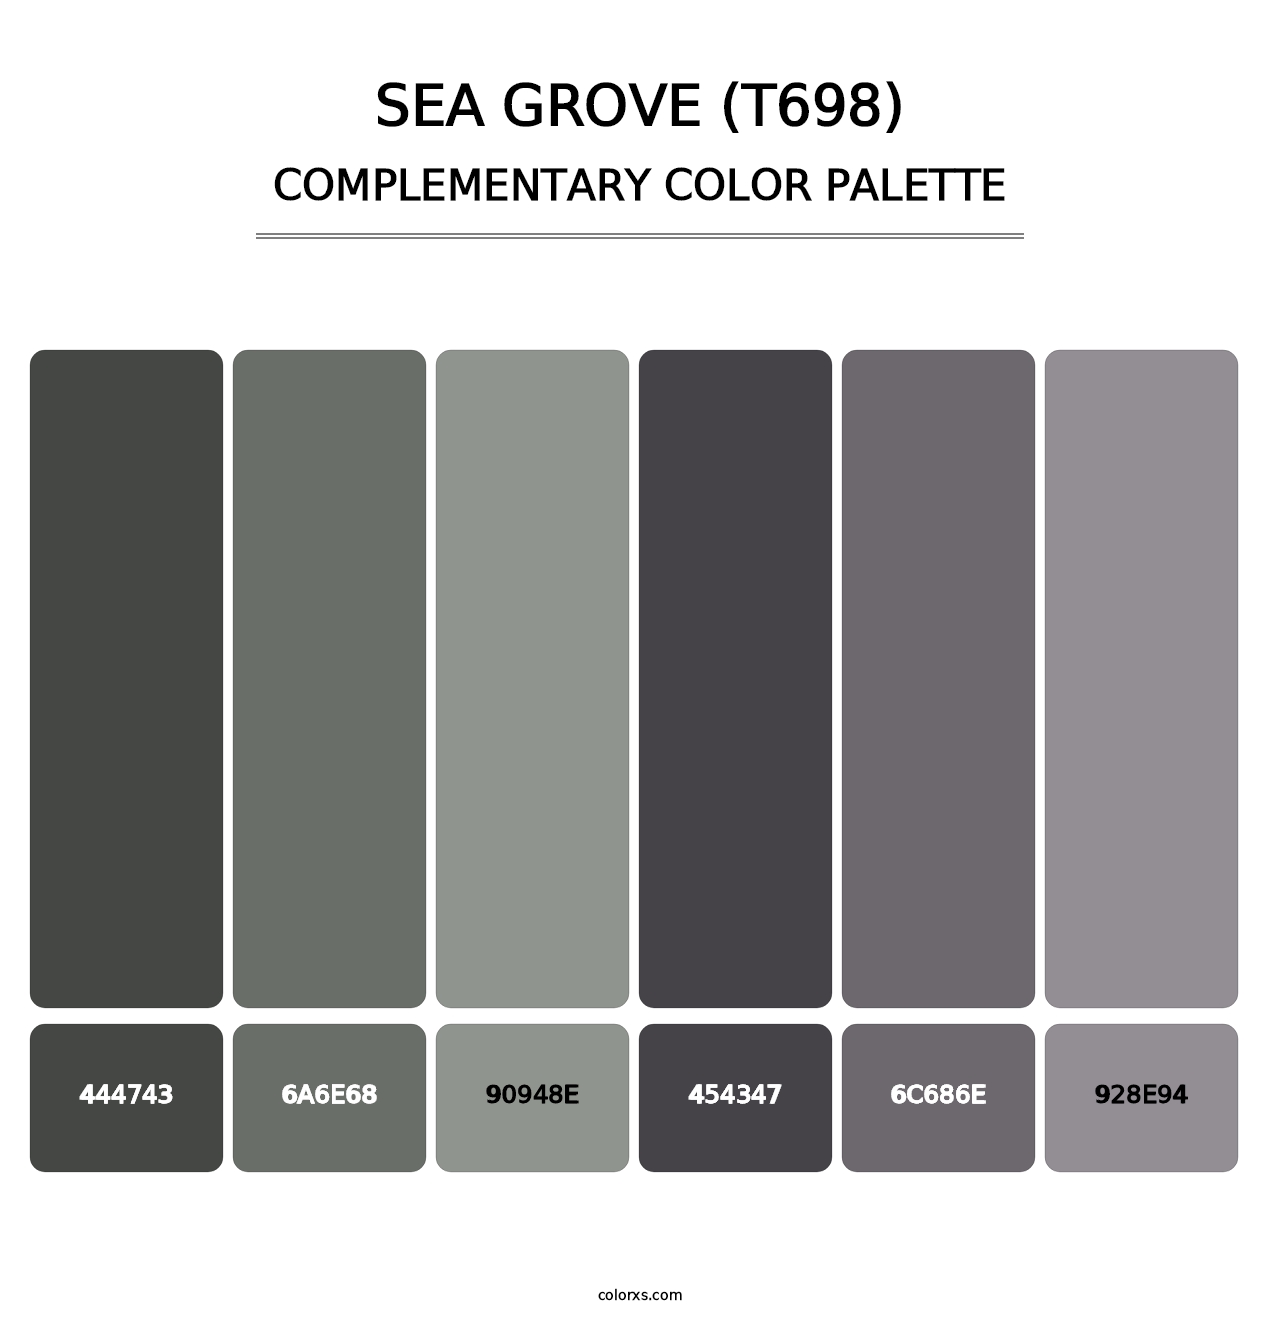 Sea Grove (T698) - Complementary Color Palette